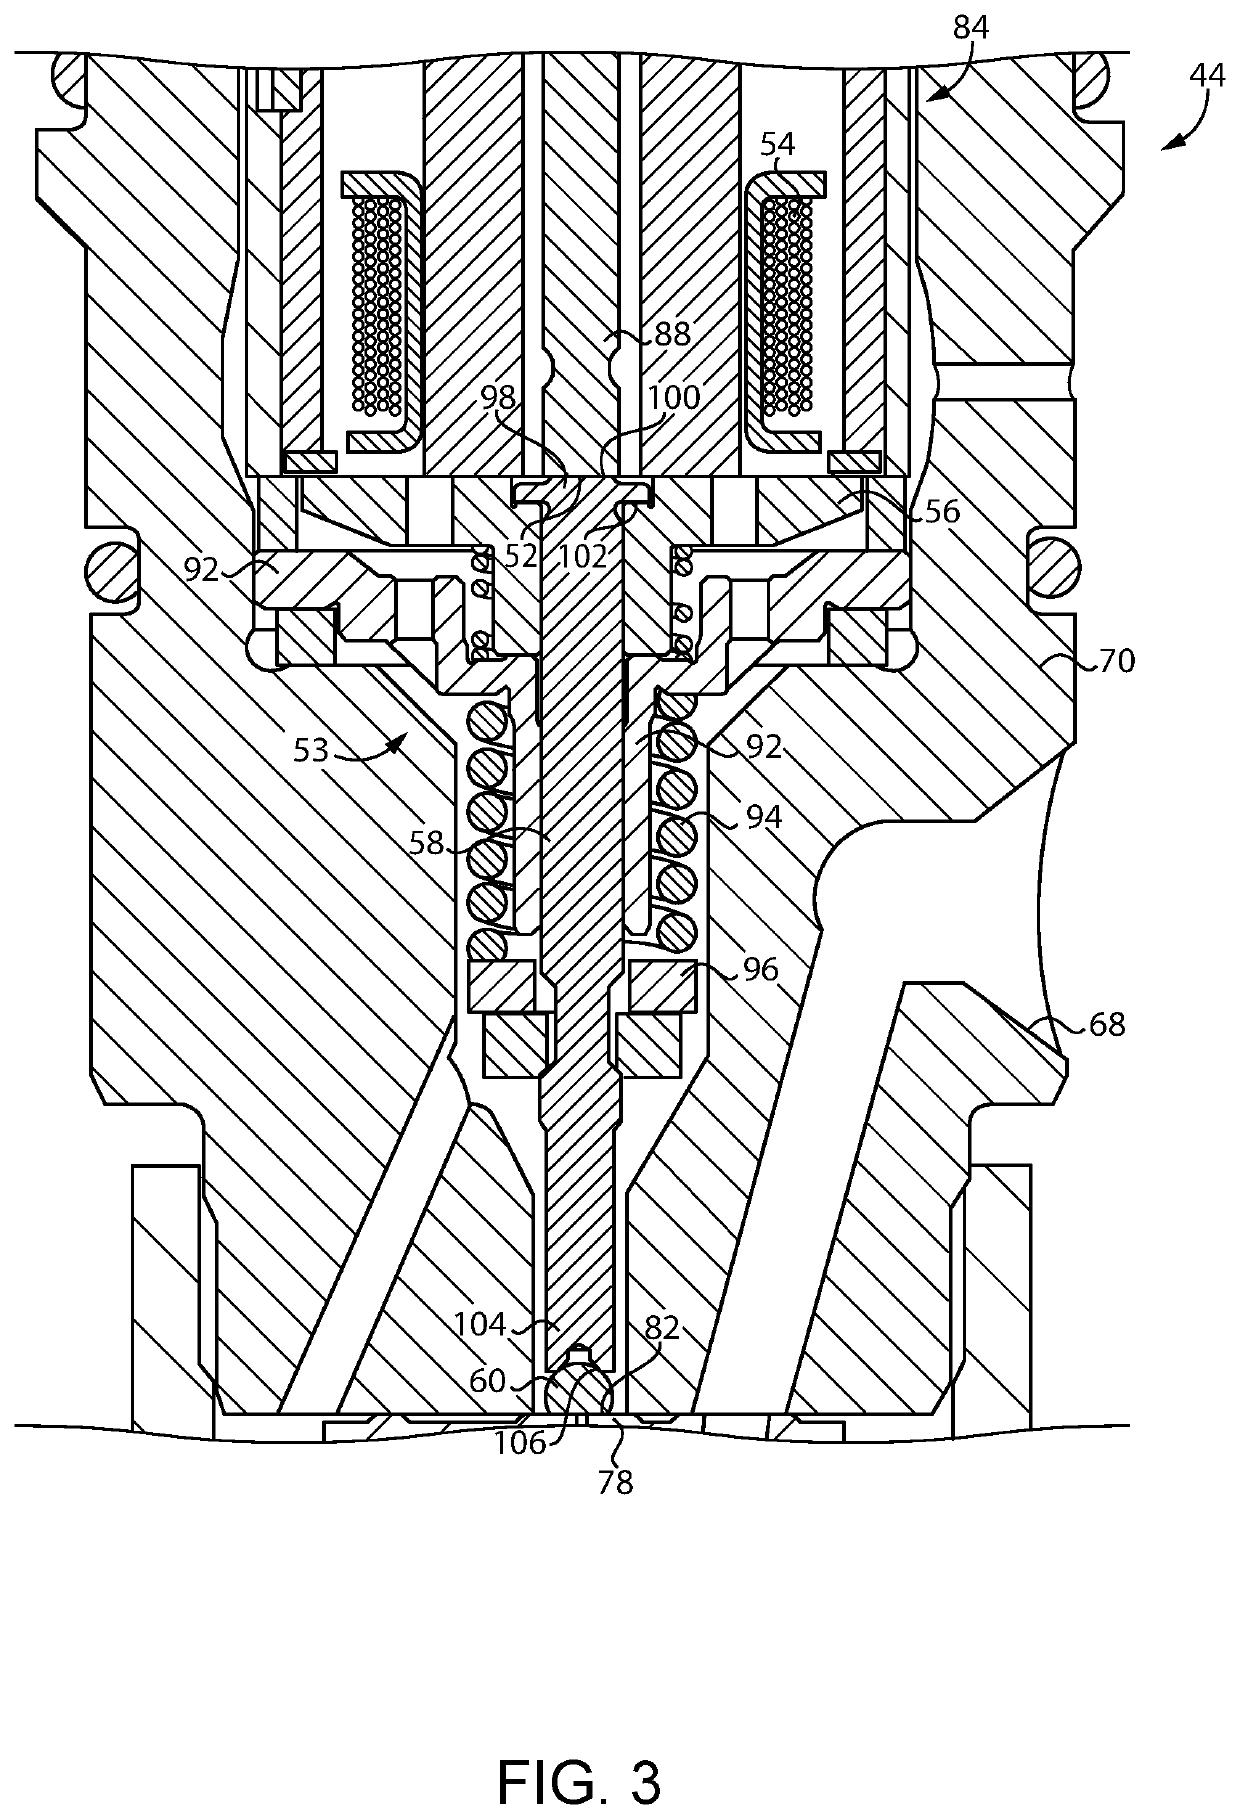 Fuel system for retarded armature lifting speed and fuel system operating method